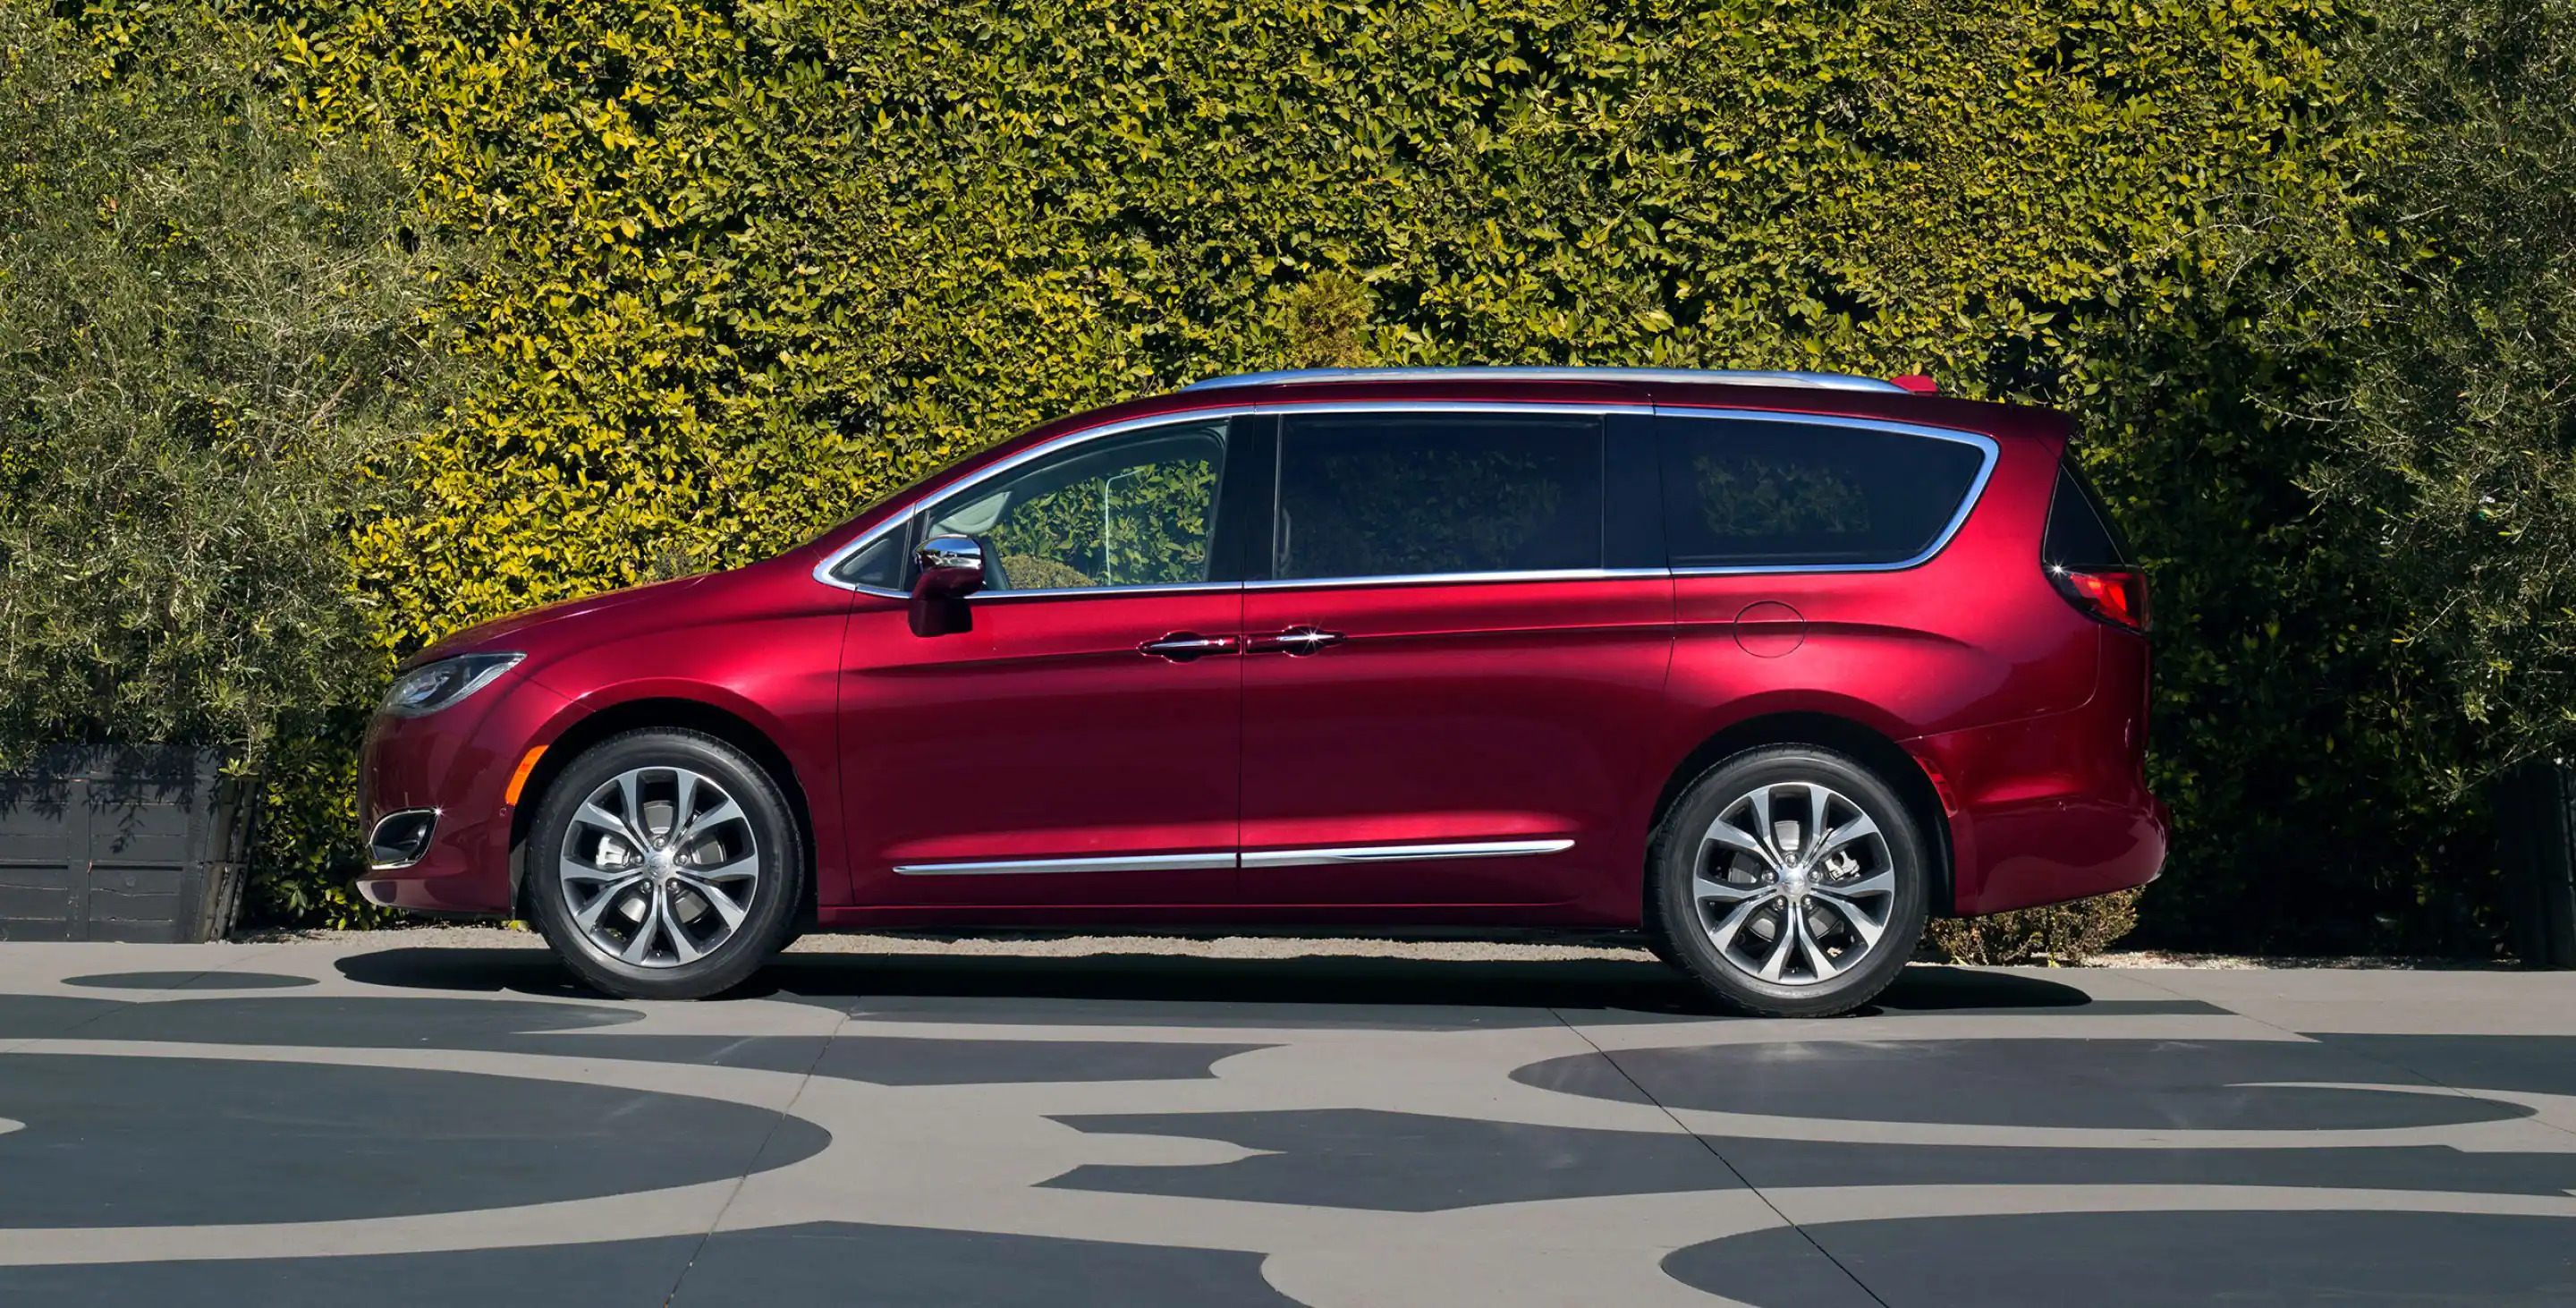 Trim Levels of the 2018 Chrysler Pacifica